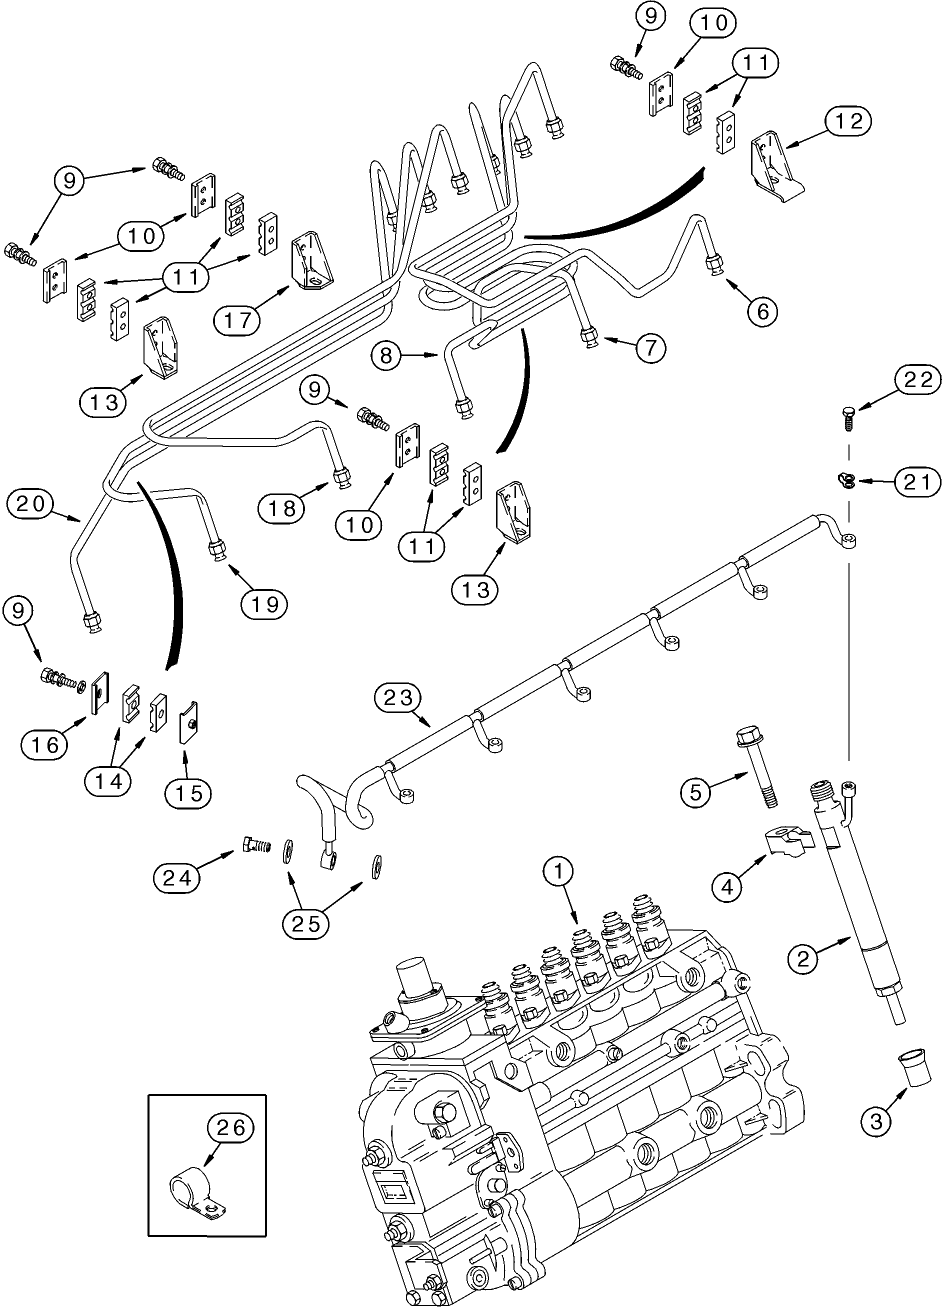 03 -01 FUEL INJECTION SYSTEM, TG210 AND TG230